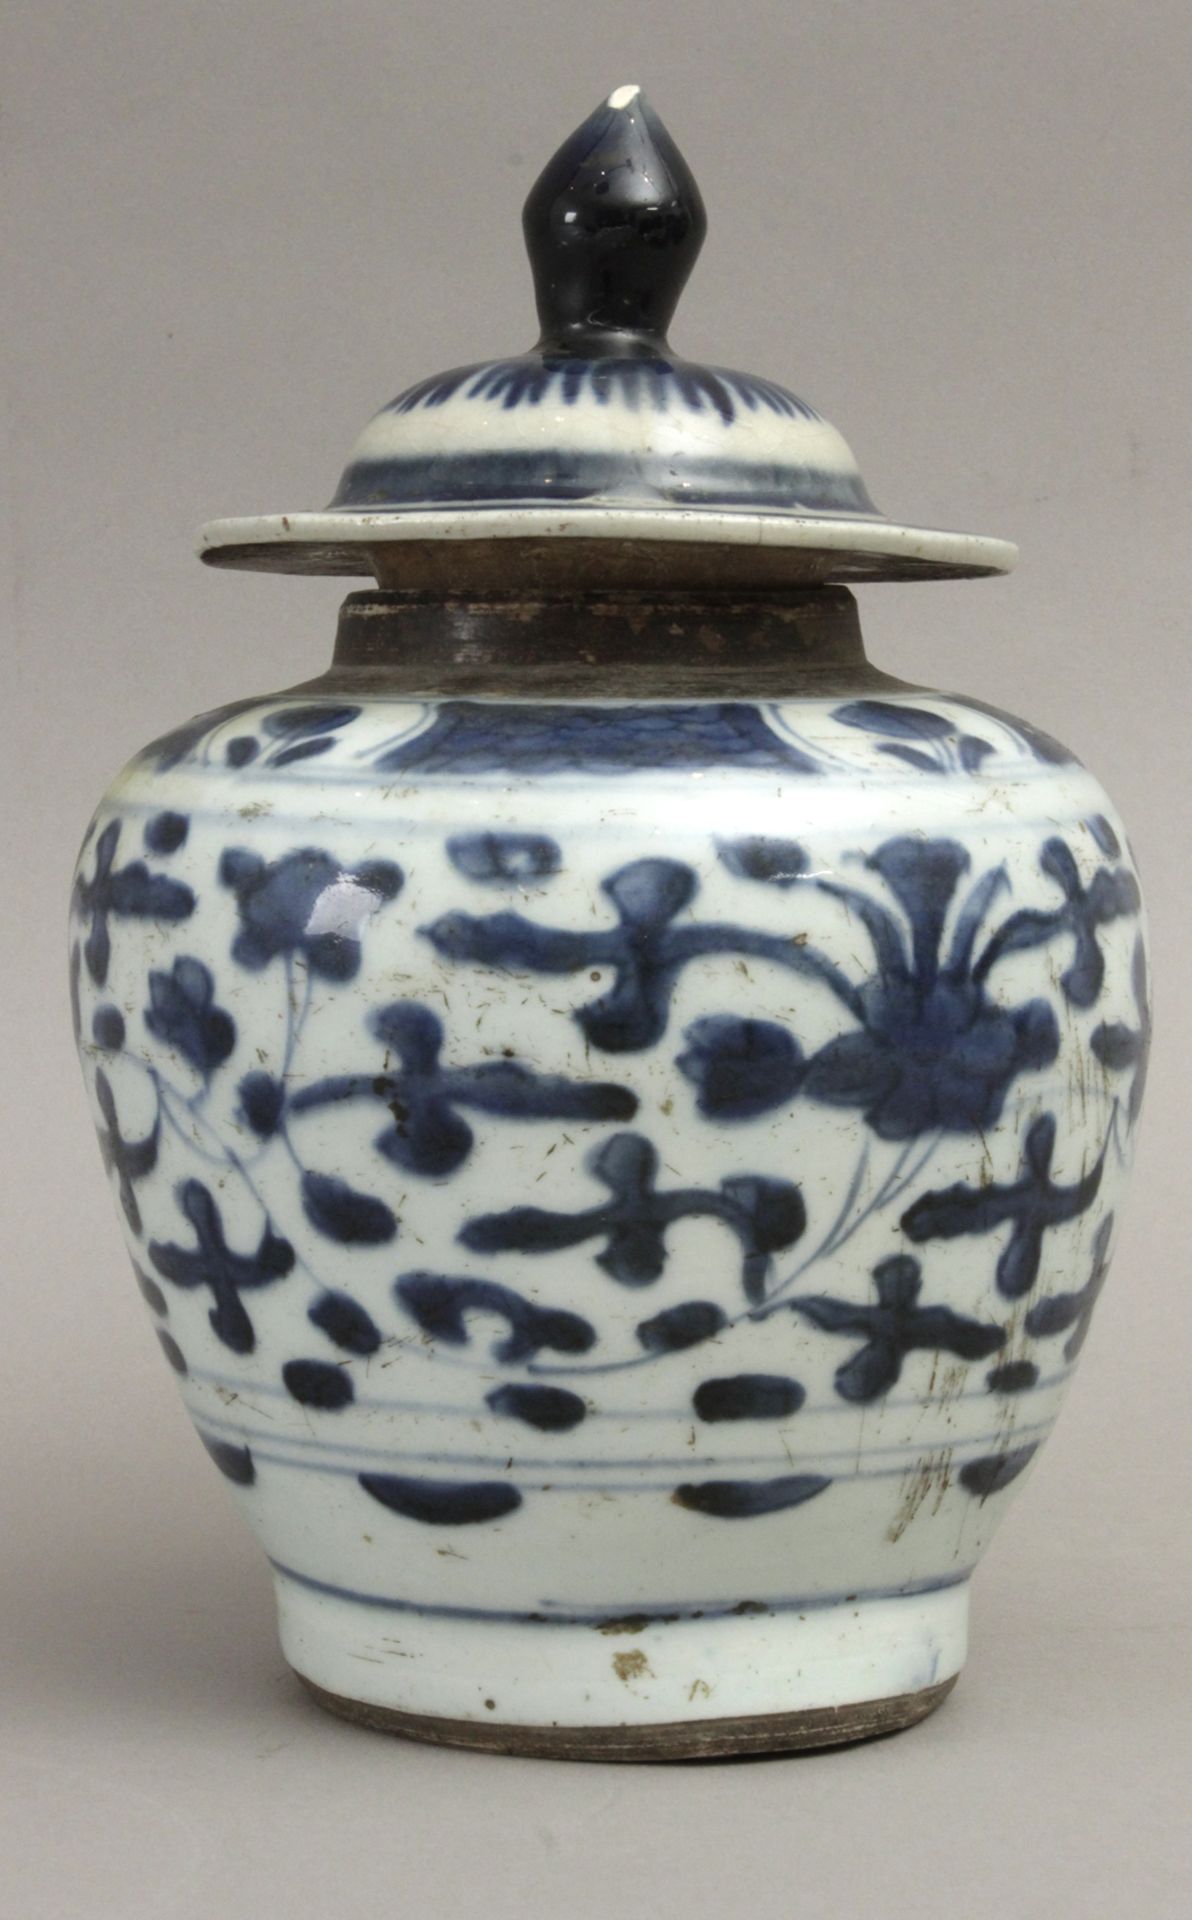 A late 19th century Chinese vase and cover in white and blue porcelain